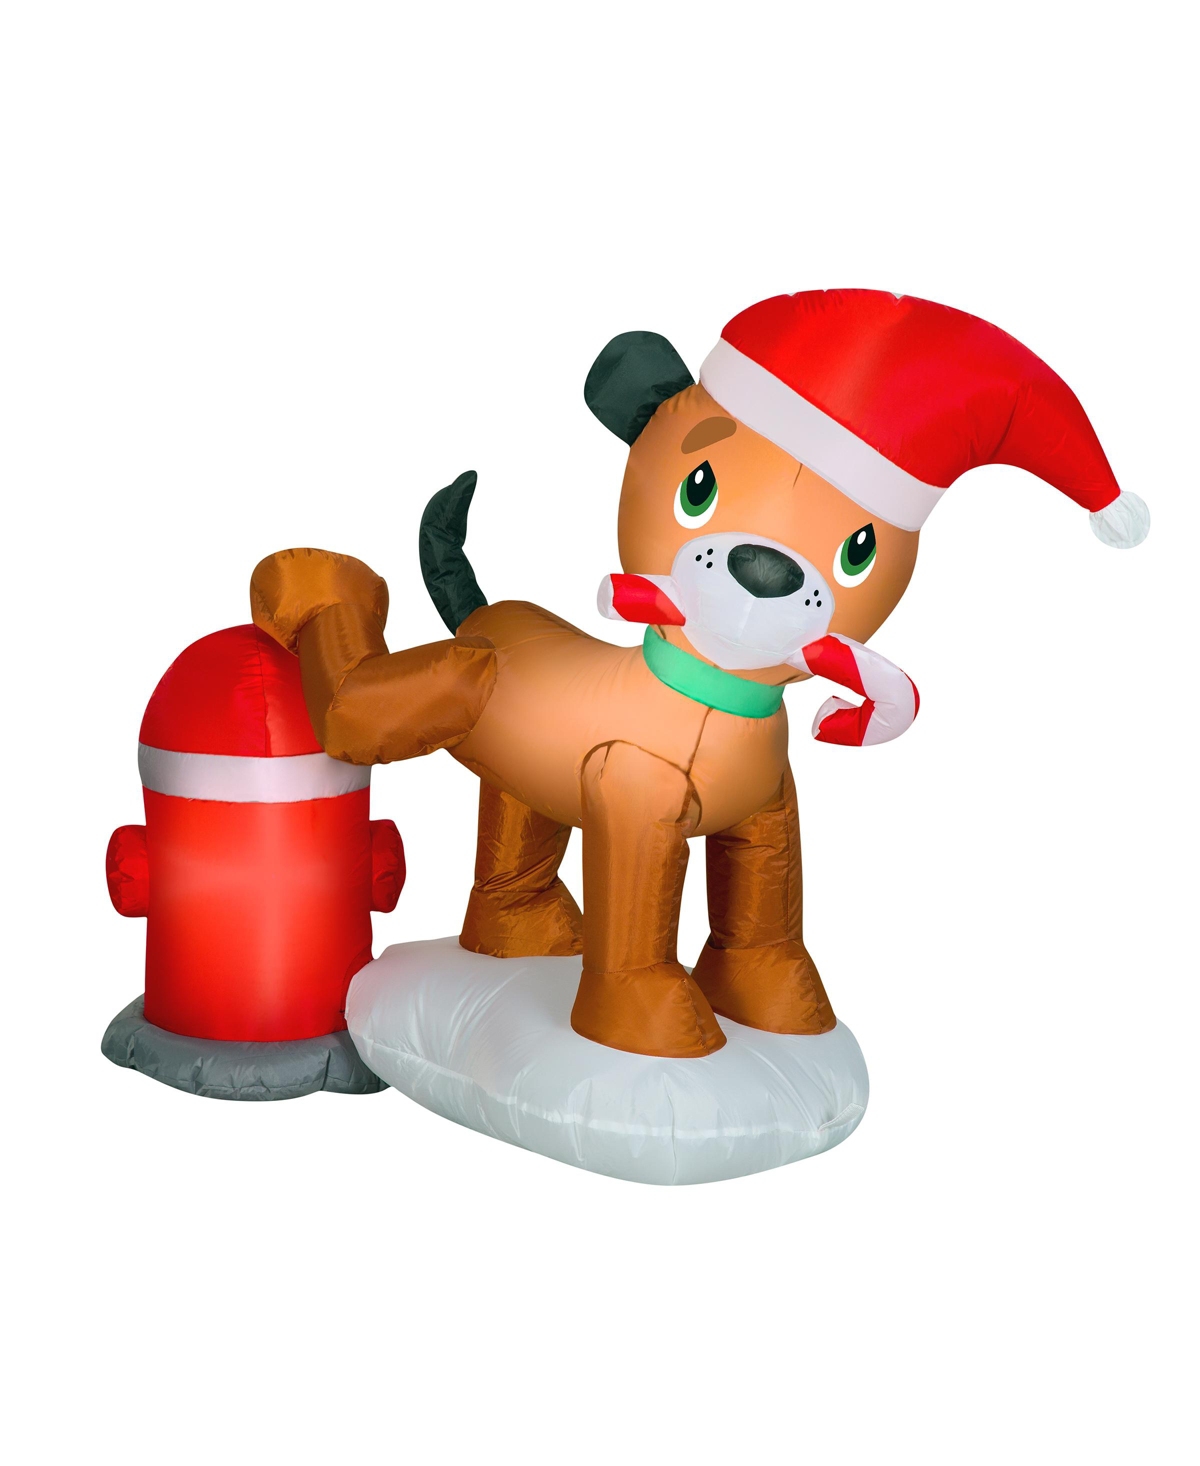 4' Inflatable Puppy Dog and Fire Hydrant - Red